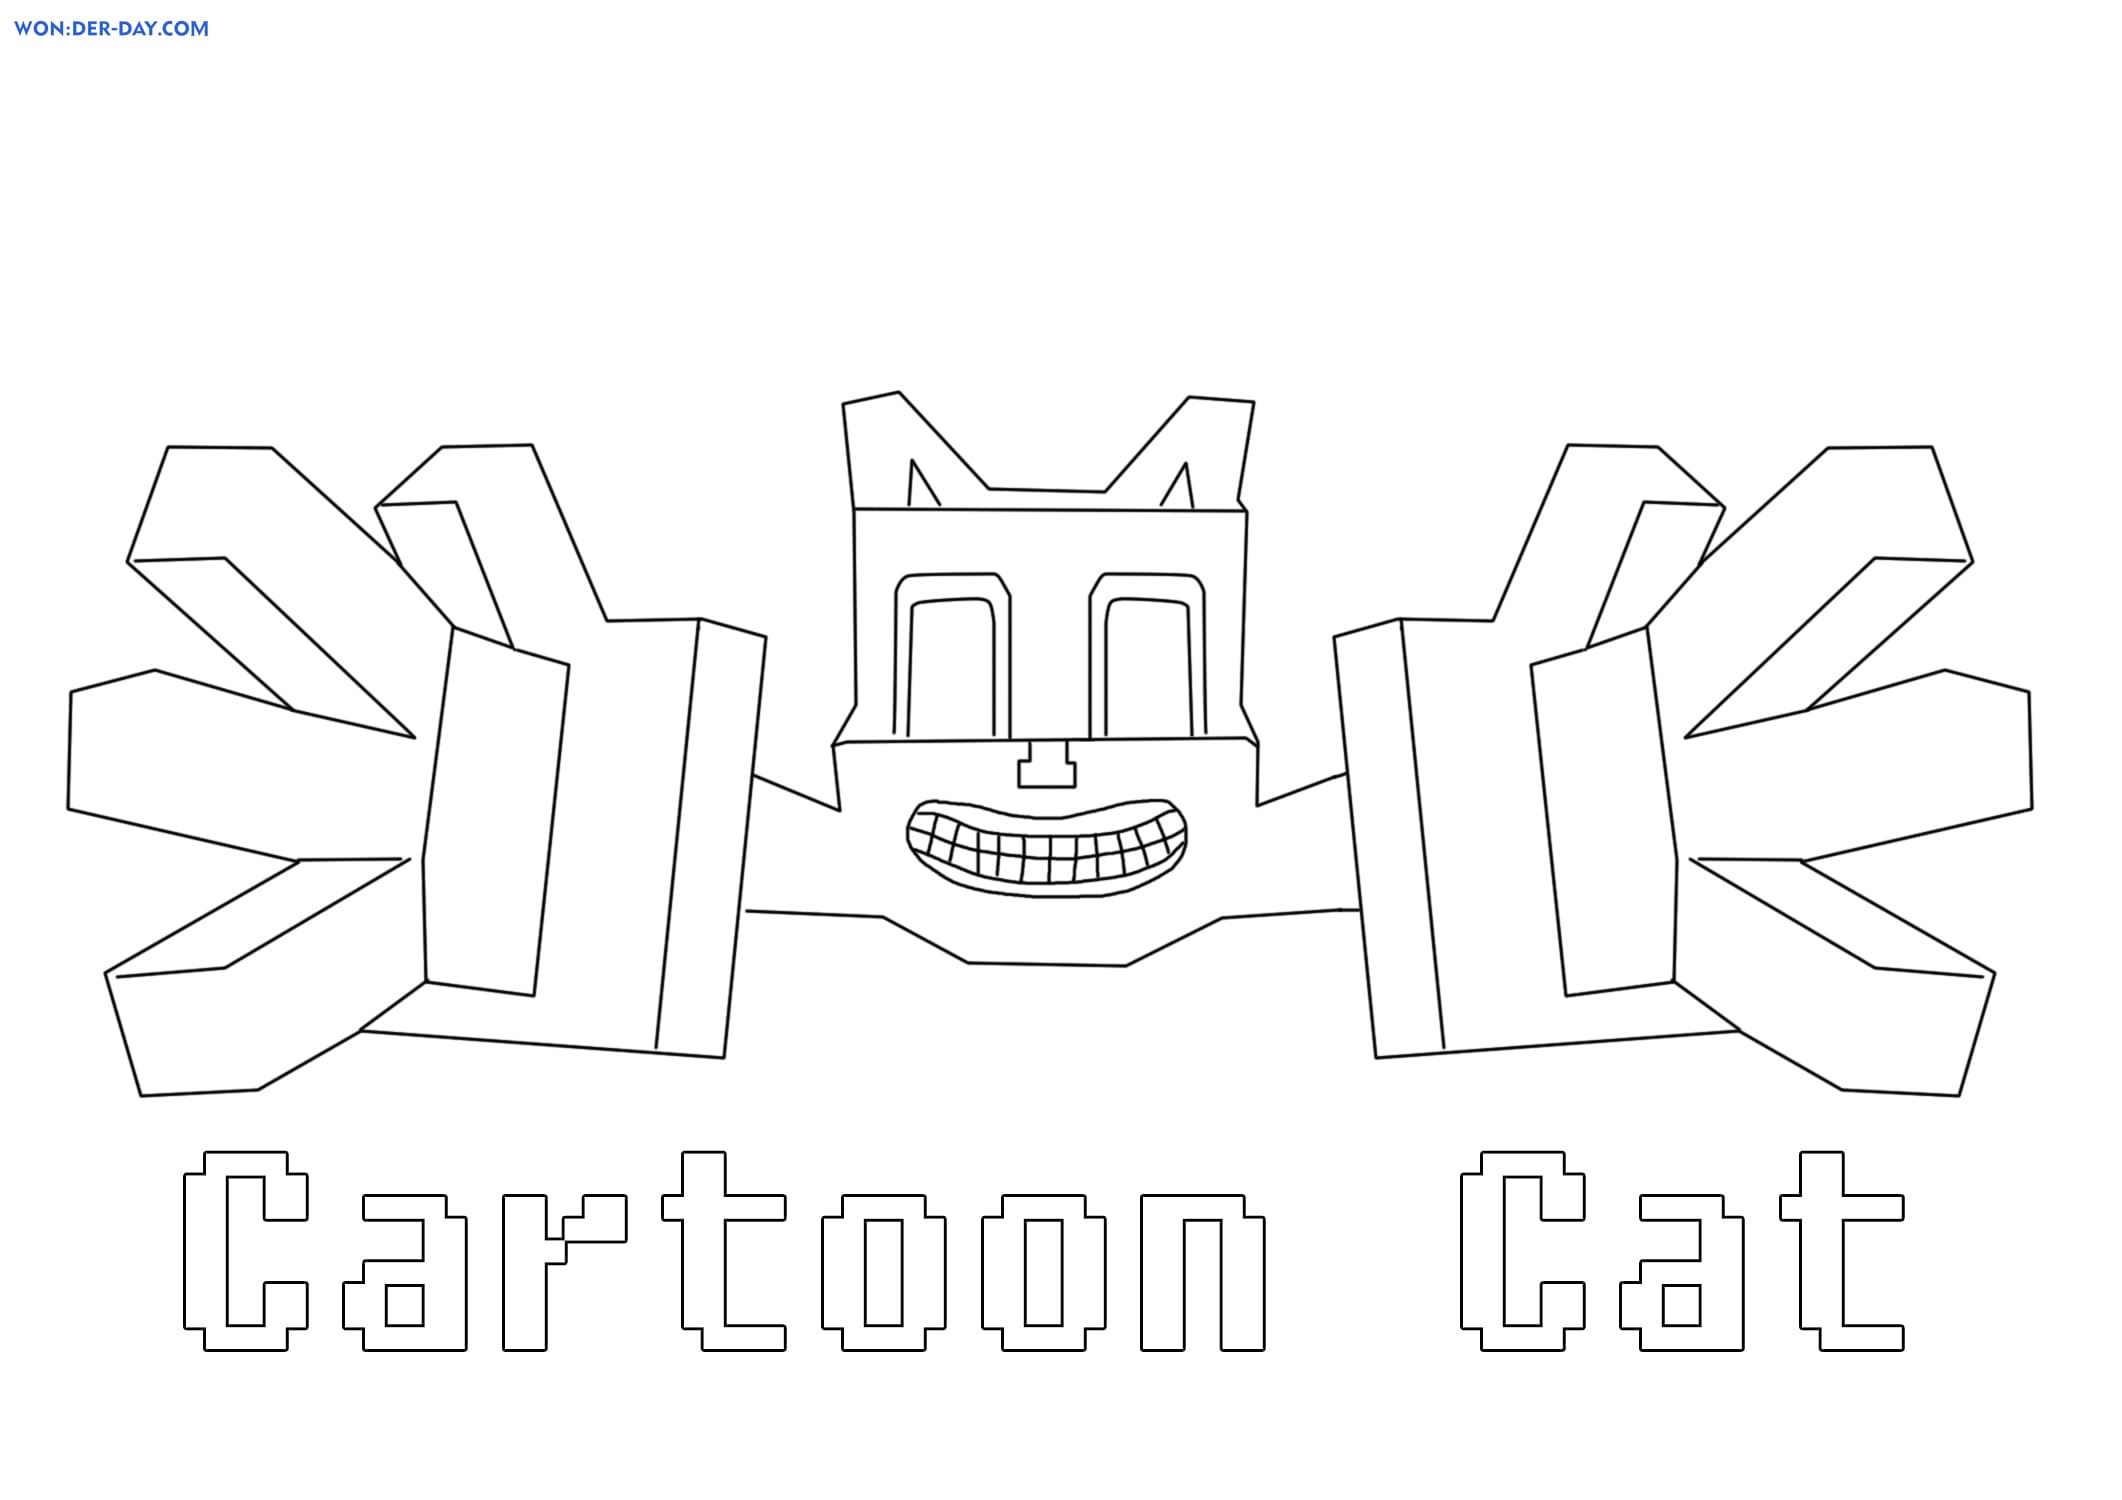 Cartoon Cat coloring pages for free printing — WONDER DAY — Coloring pages  for children and adults